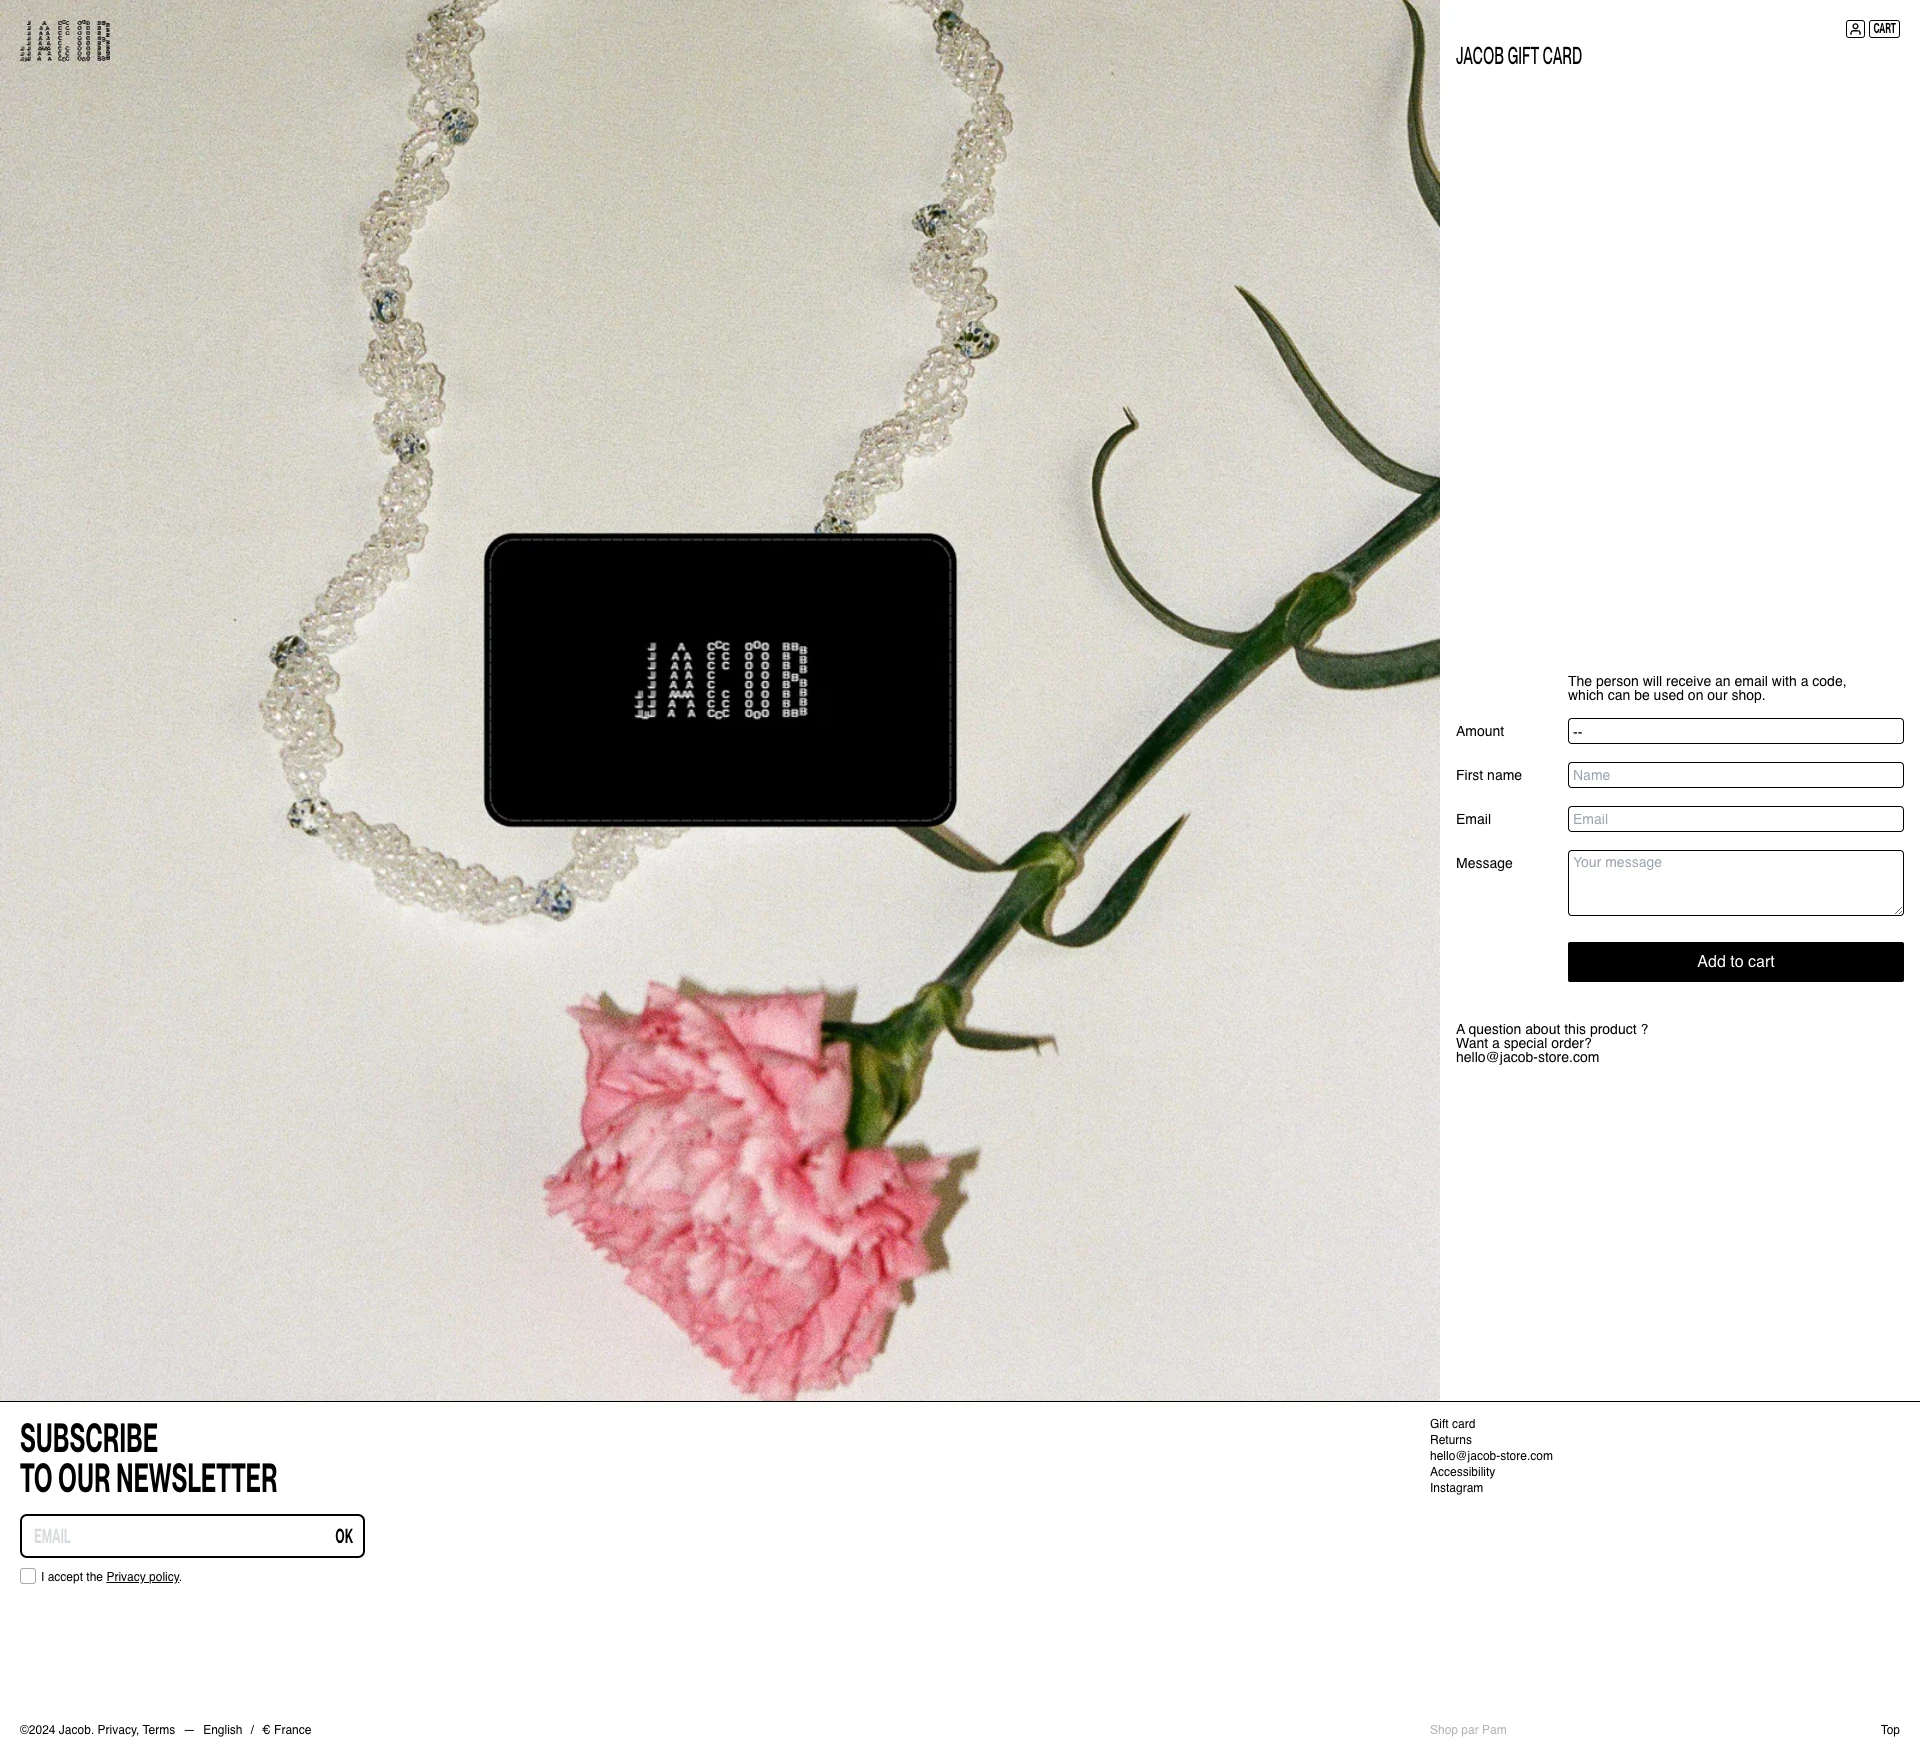 Jacob Landing Page Example: Our first collection of handmade, unique and evolving necklaces, bracelets and belts.